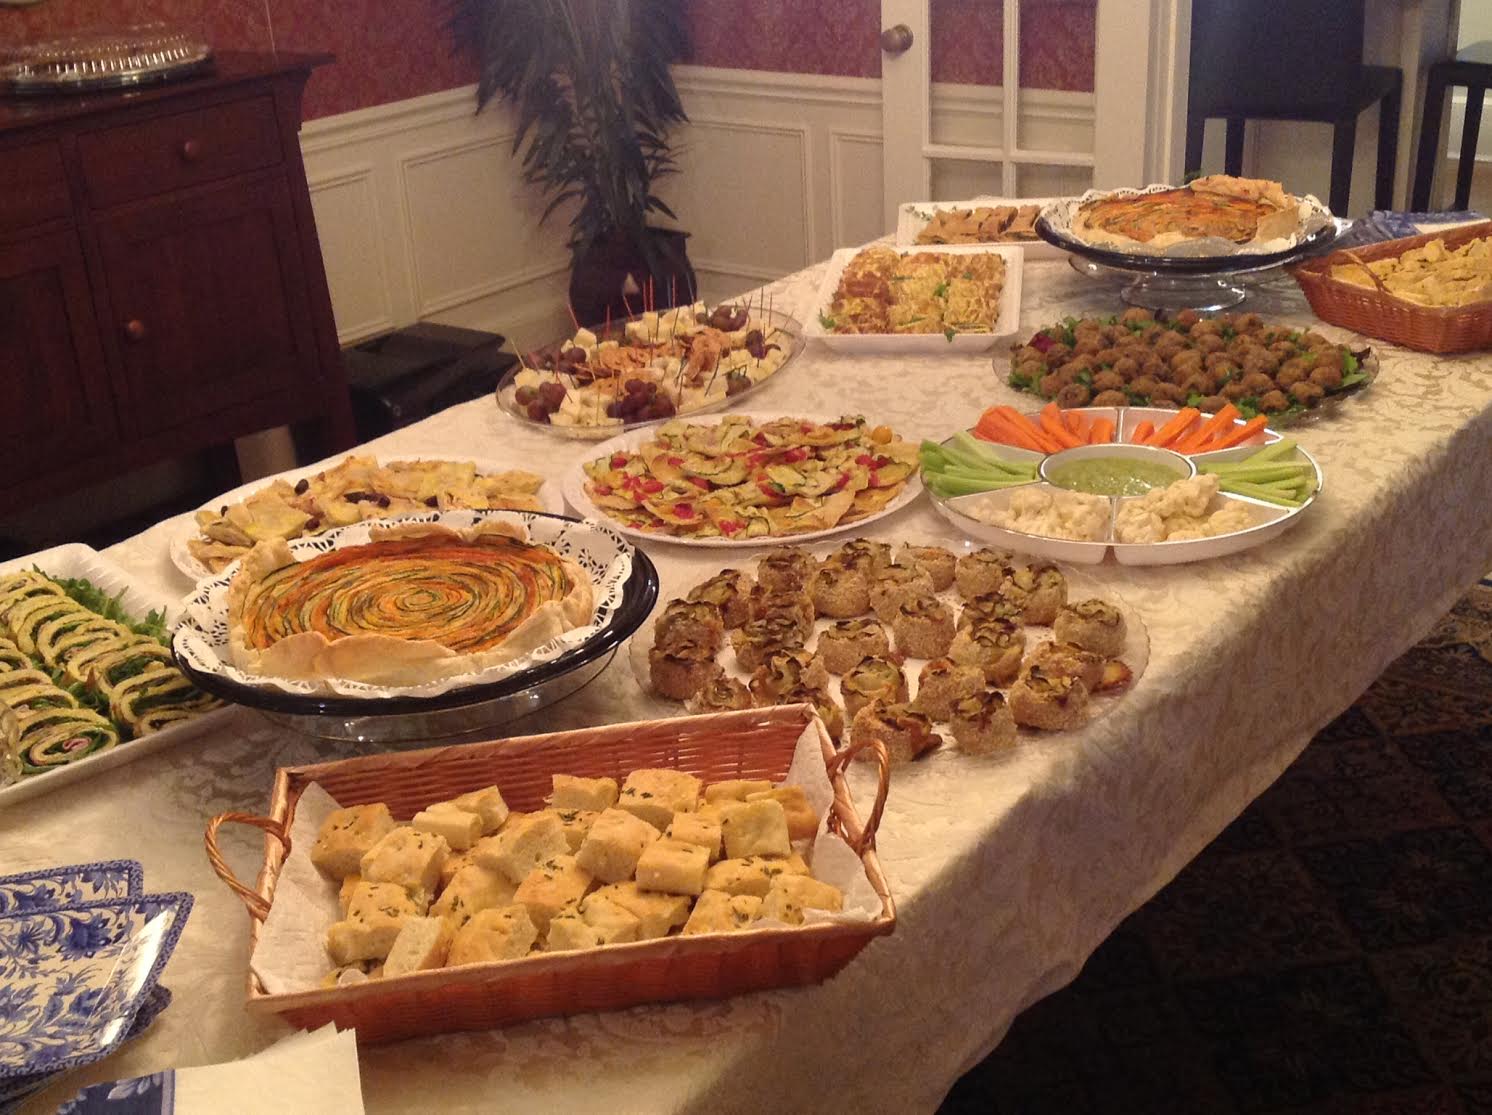 Catering by From Scratch in Ridgwood New Jersey.